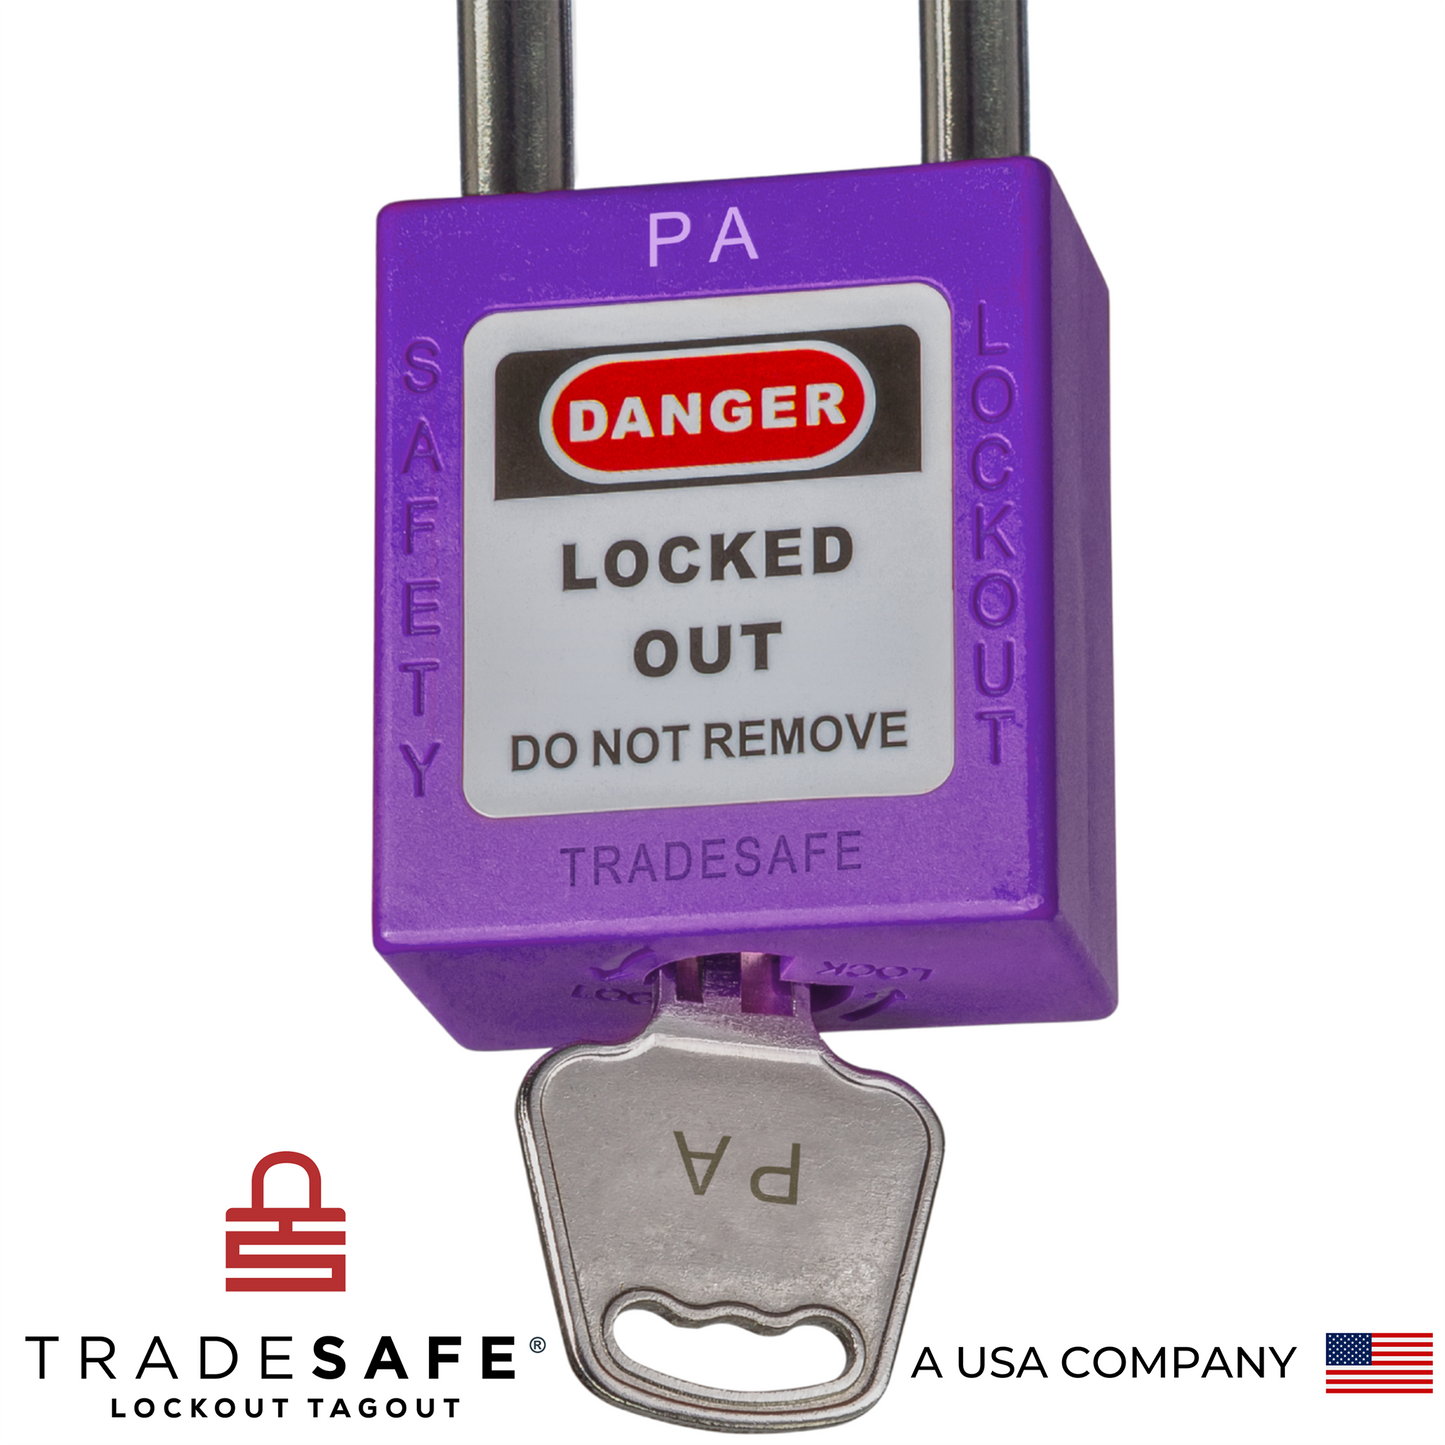 a close-up view of a purple loto padlock's body with a key inserted